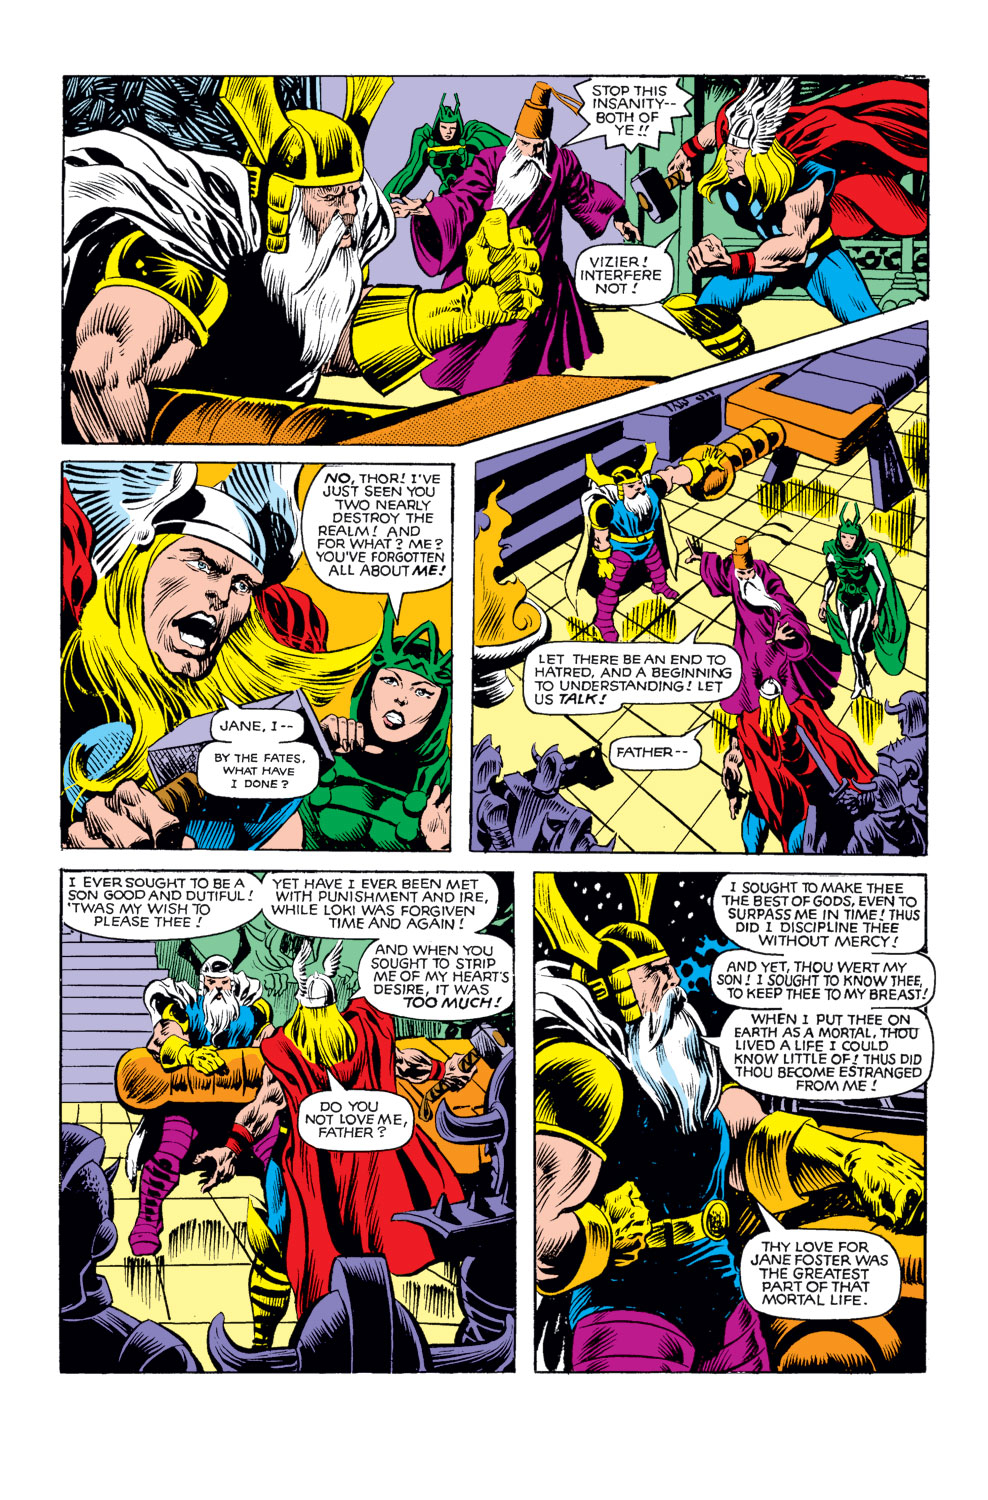 What If? (1977) Issue #25 - Thor and the Avengers battled the gods #25 - English 31